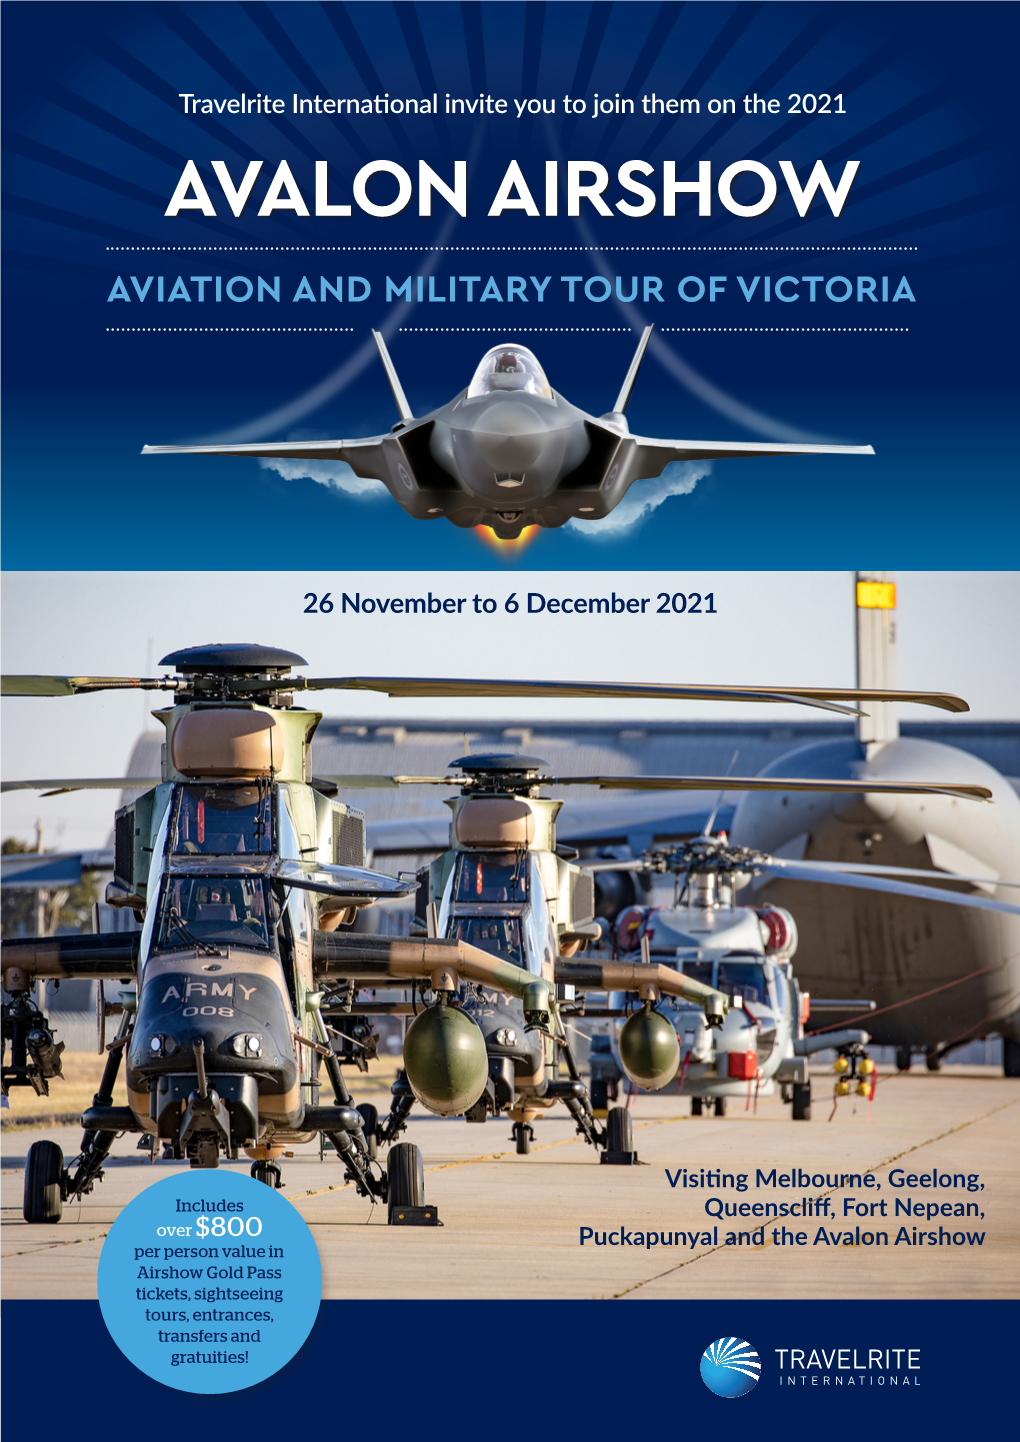 Avalon Airshow Aviation and Military Tour of Victoria